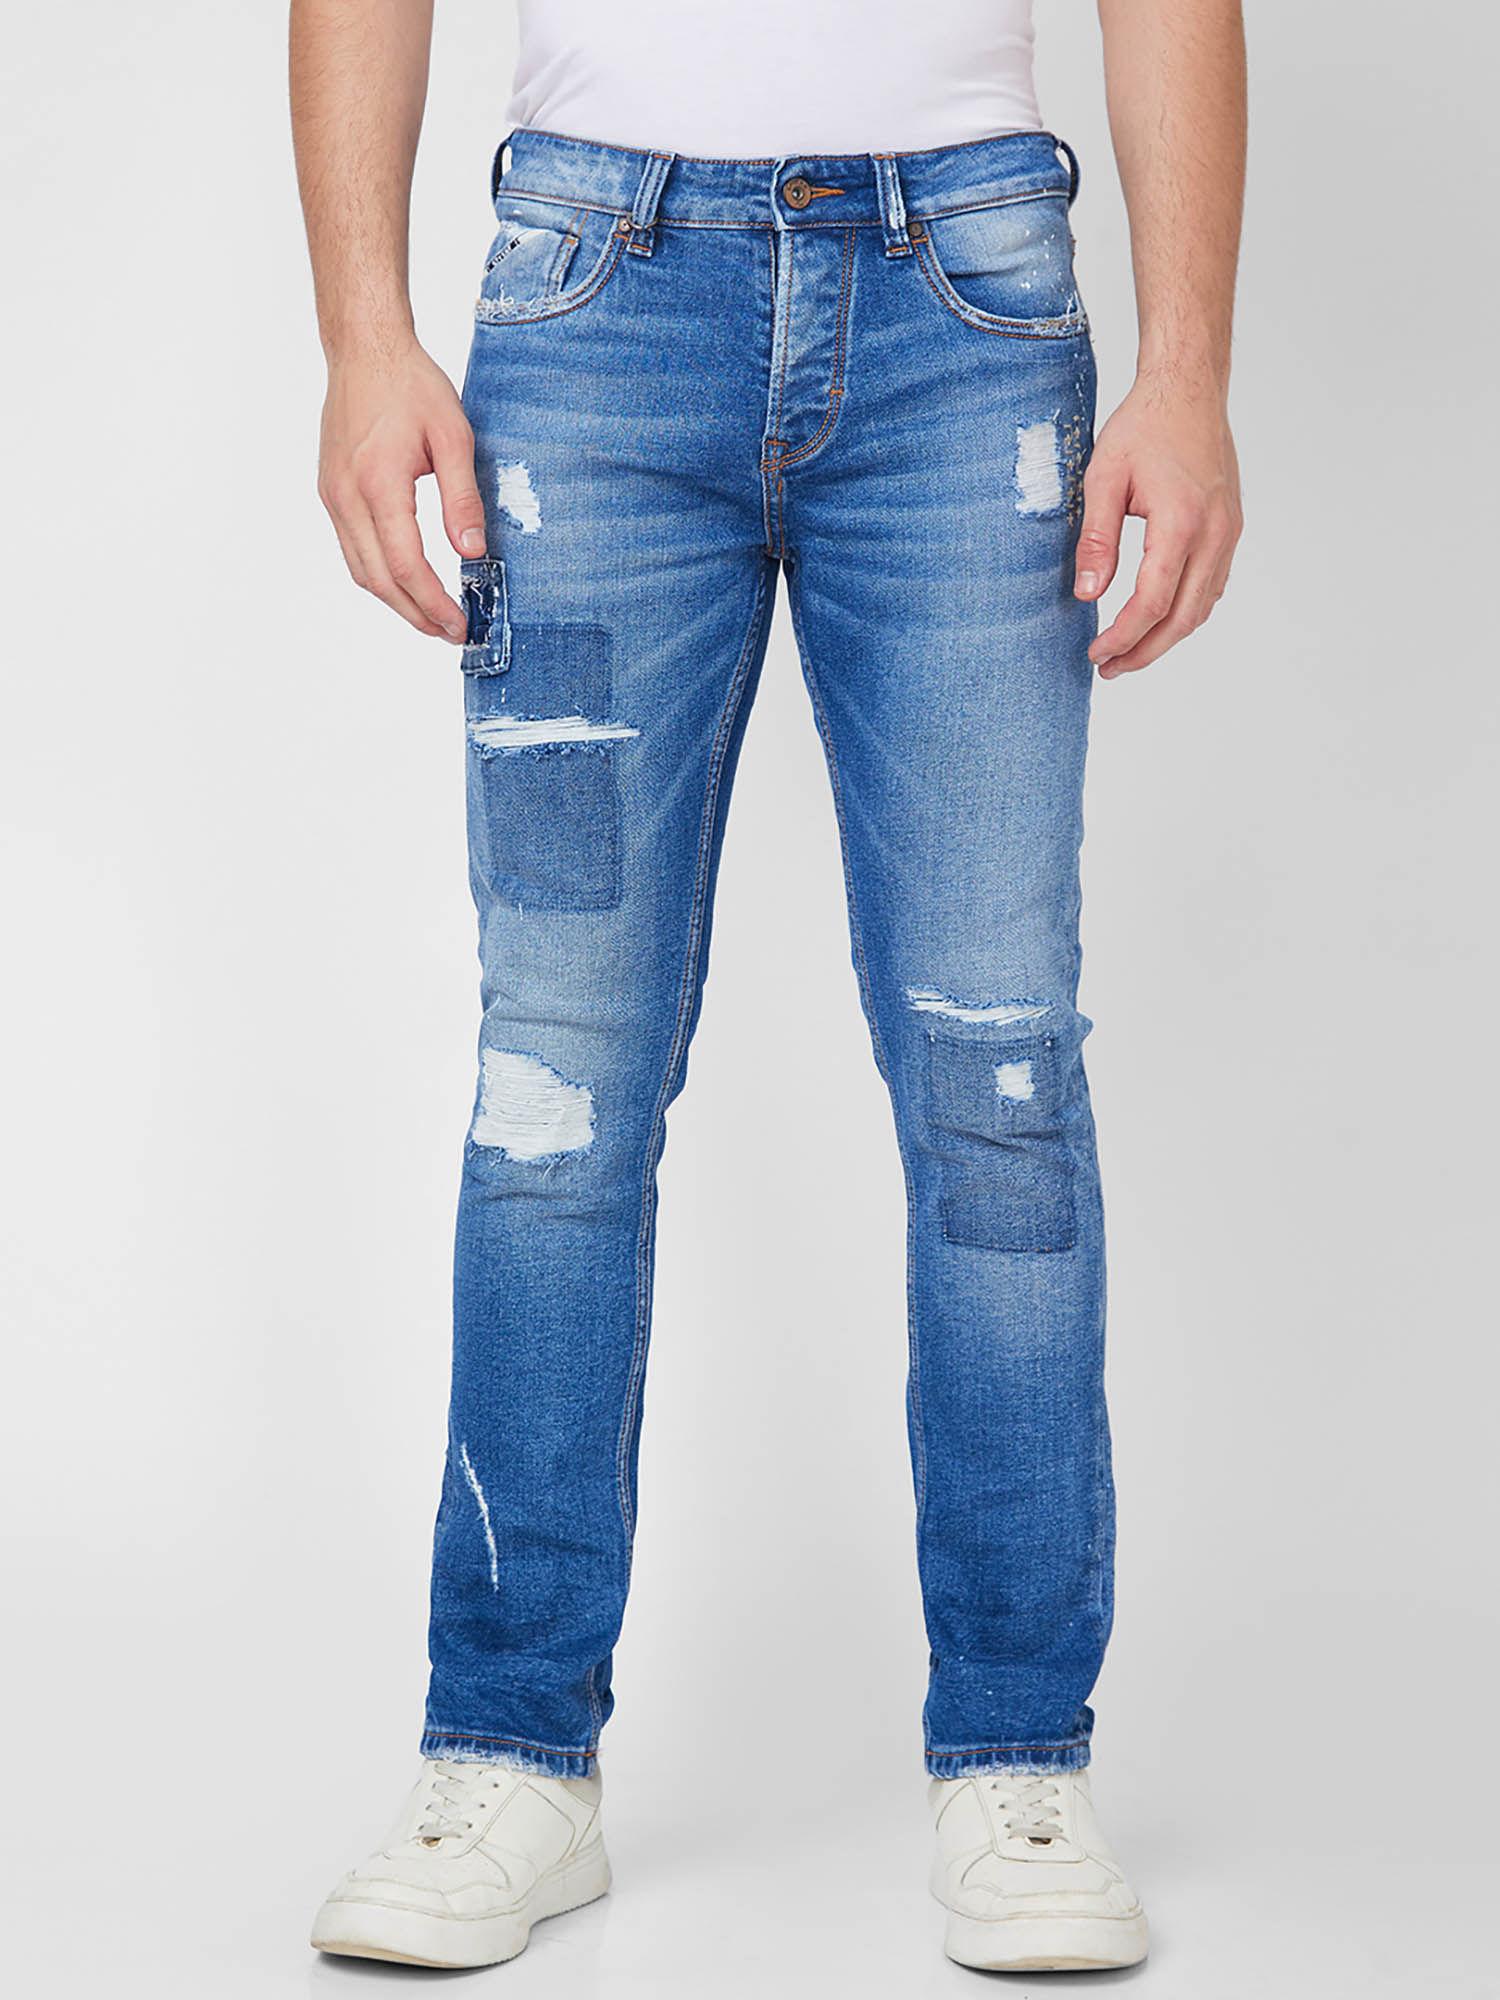 mid-rise-straight-fit-blue-jeans-for-men